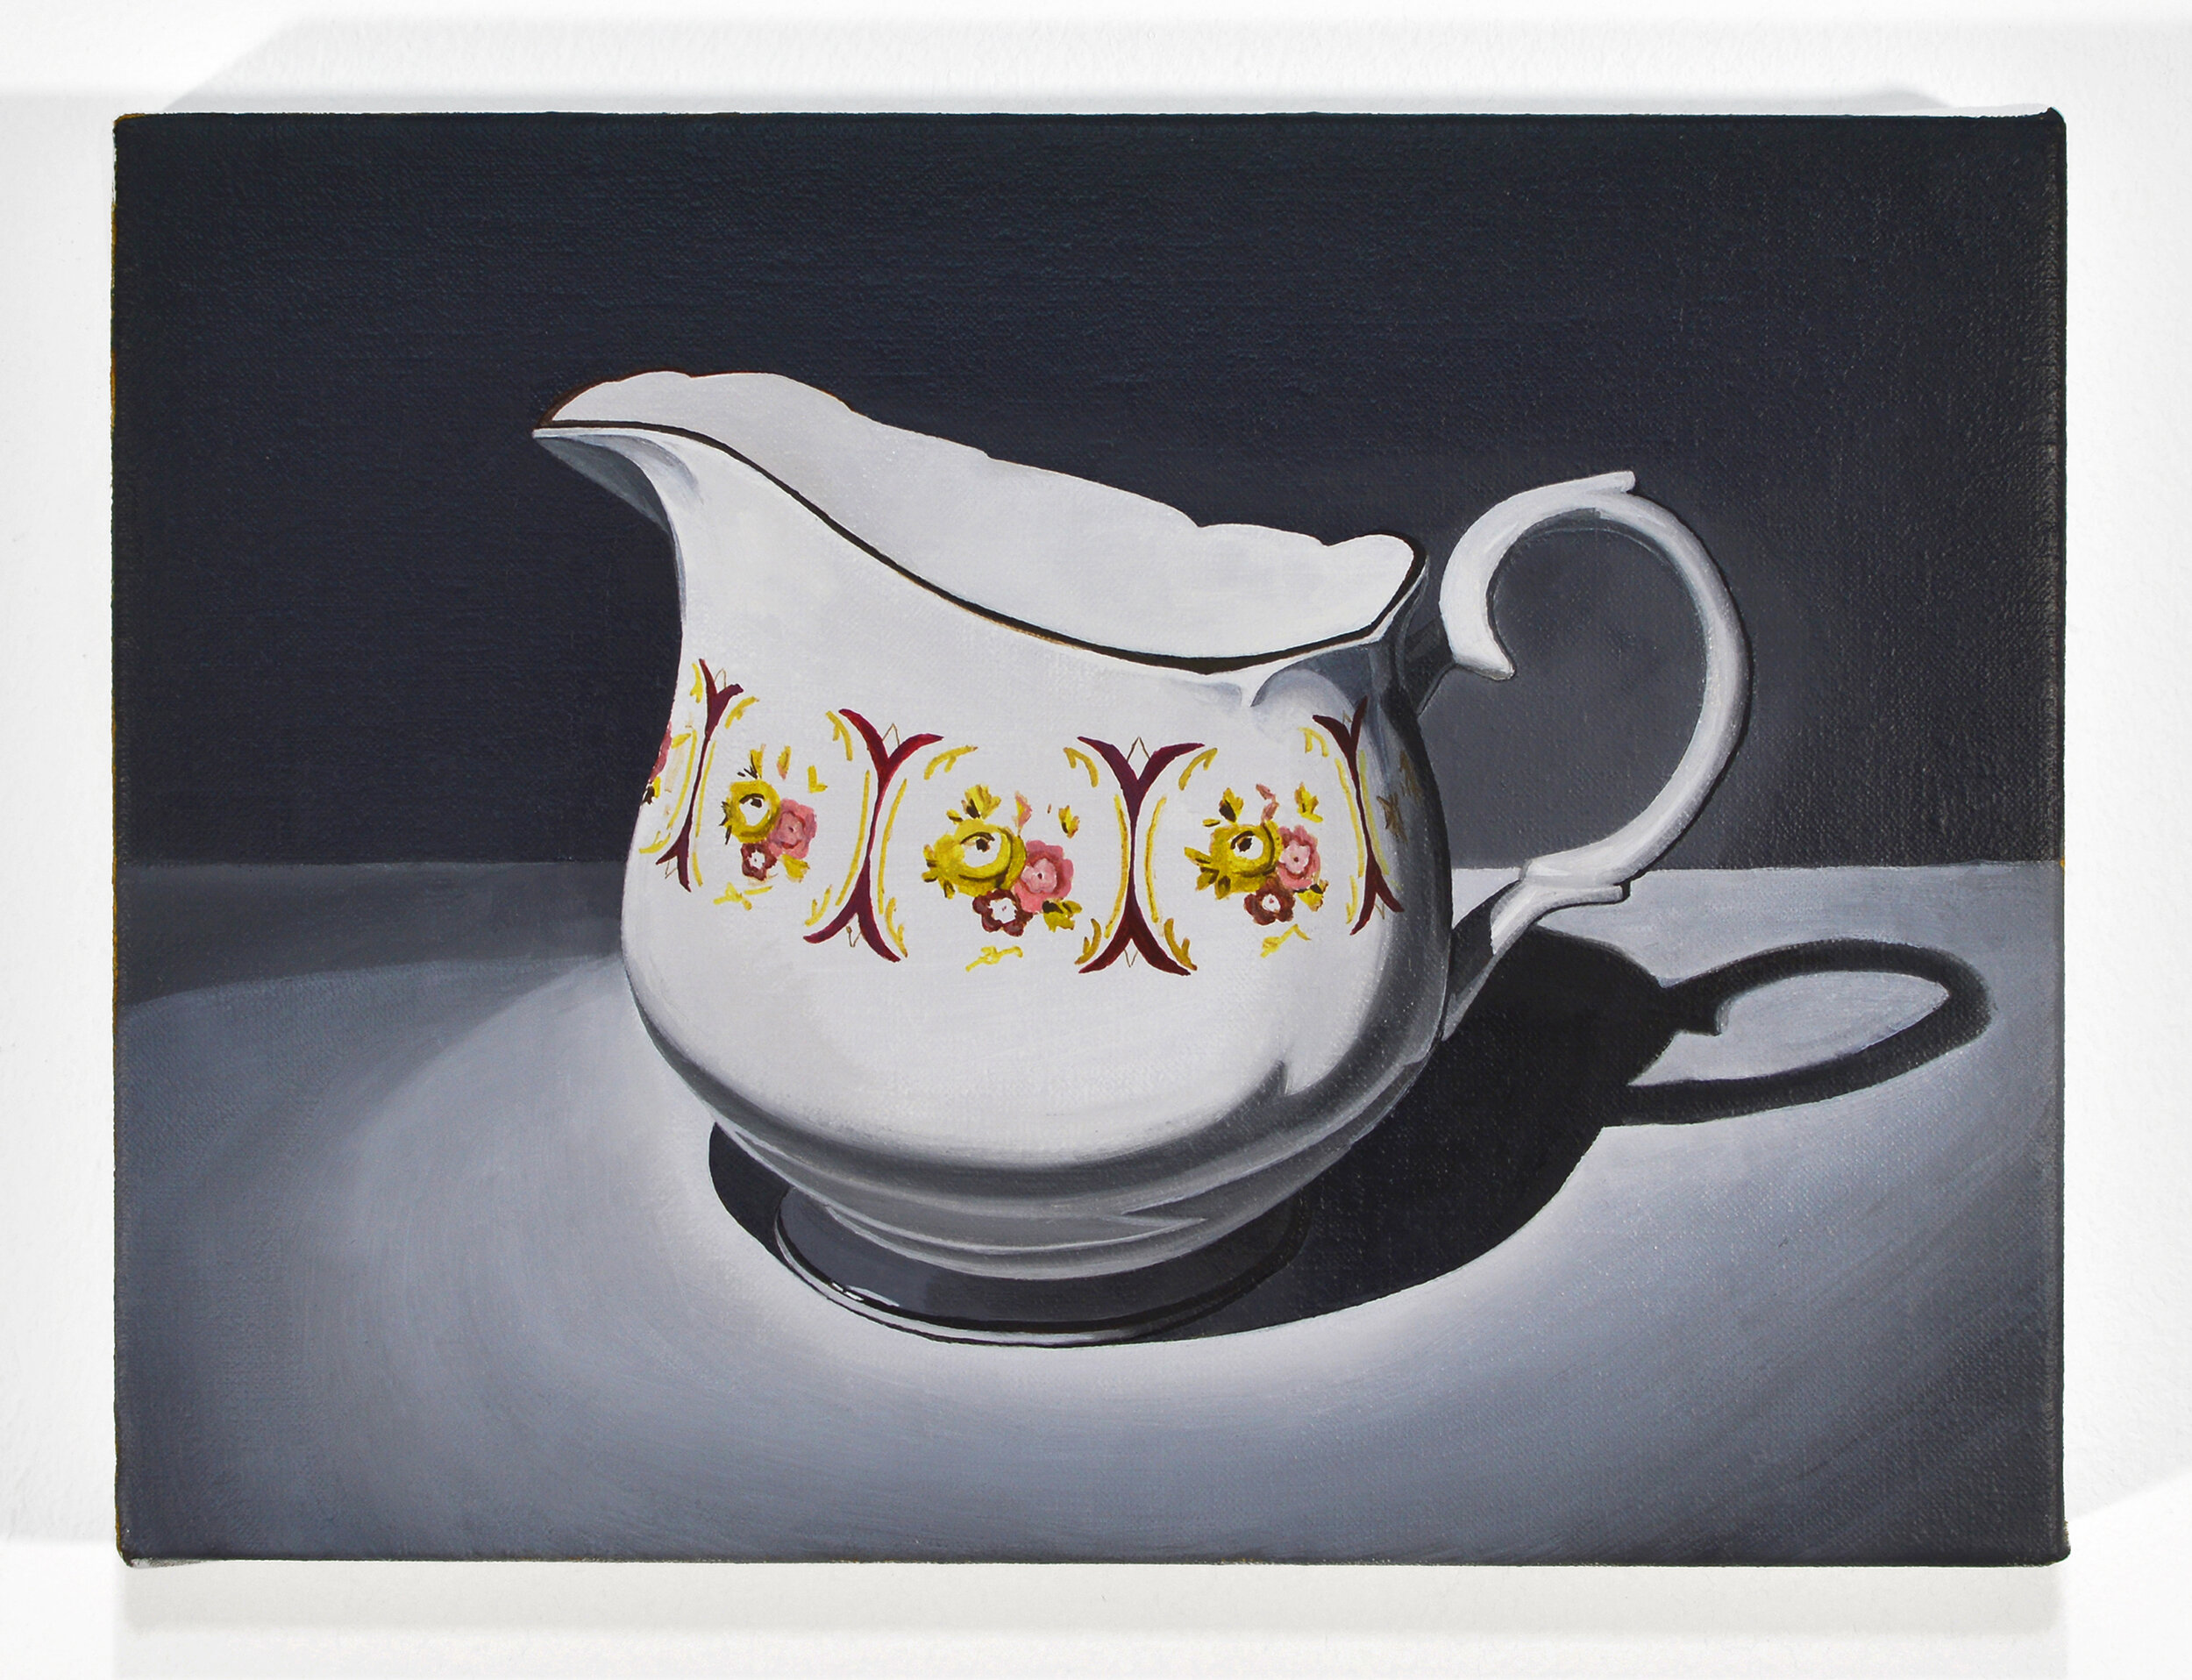  Milk jug (a) (2019)   Oil on linen  18 x 24cm  Private Collection 